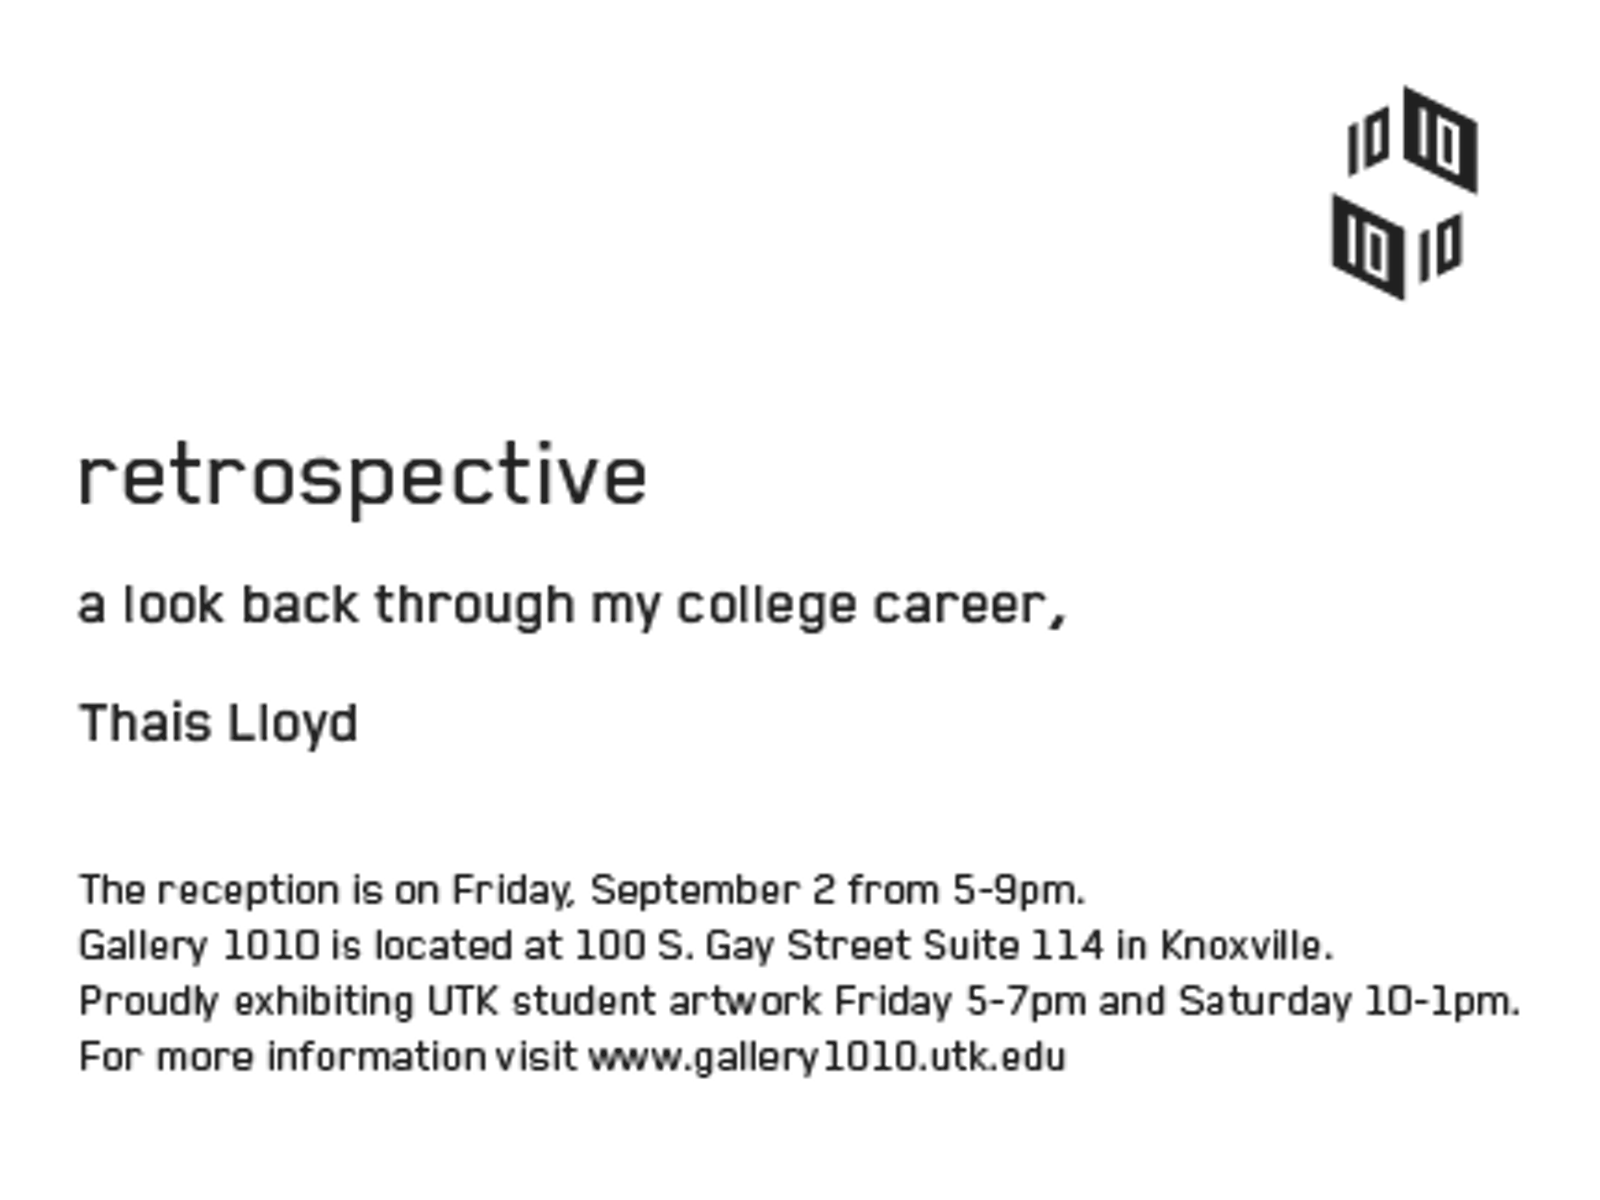 An advertisement for the Retrospective exhibition by Thais Lloyd